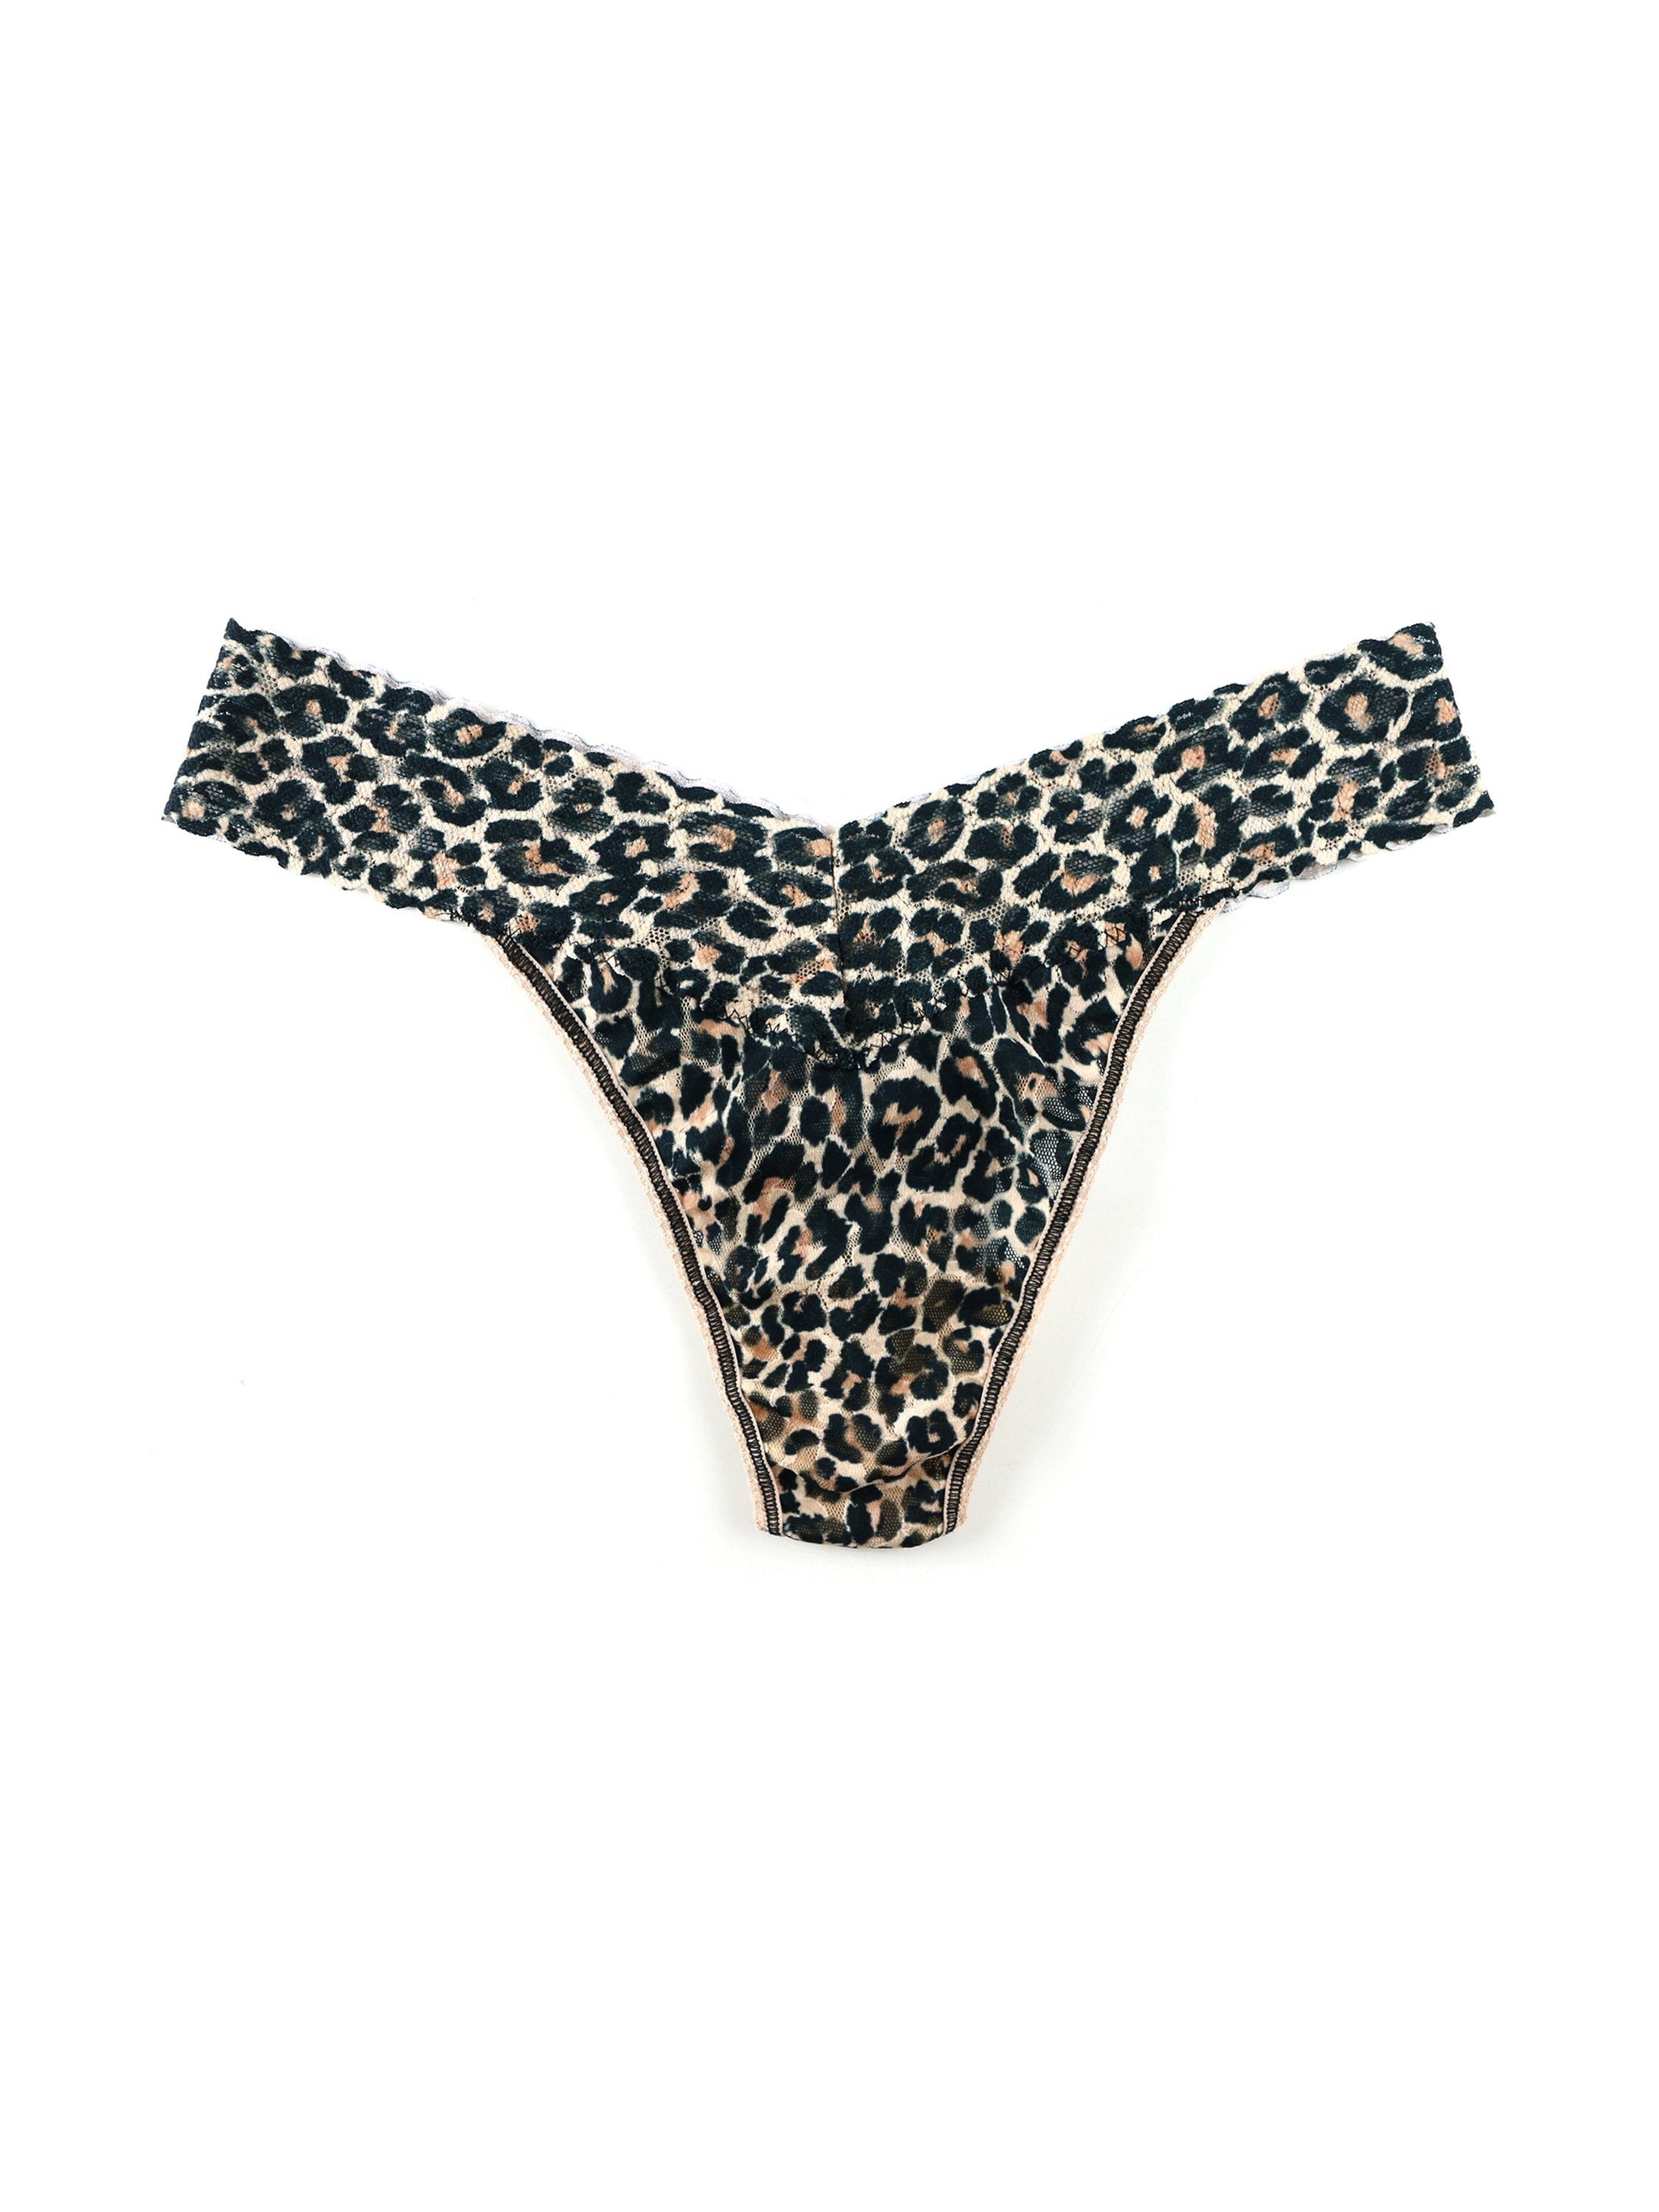 Women's Animal Print Cute Briefs with Ears – ANIMALS FRIENDS